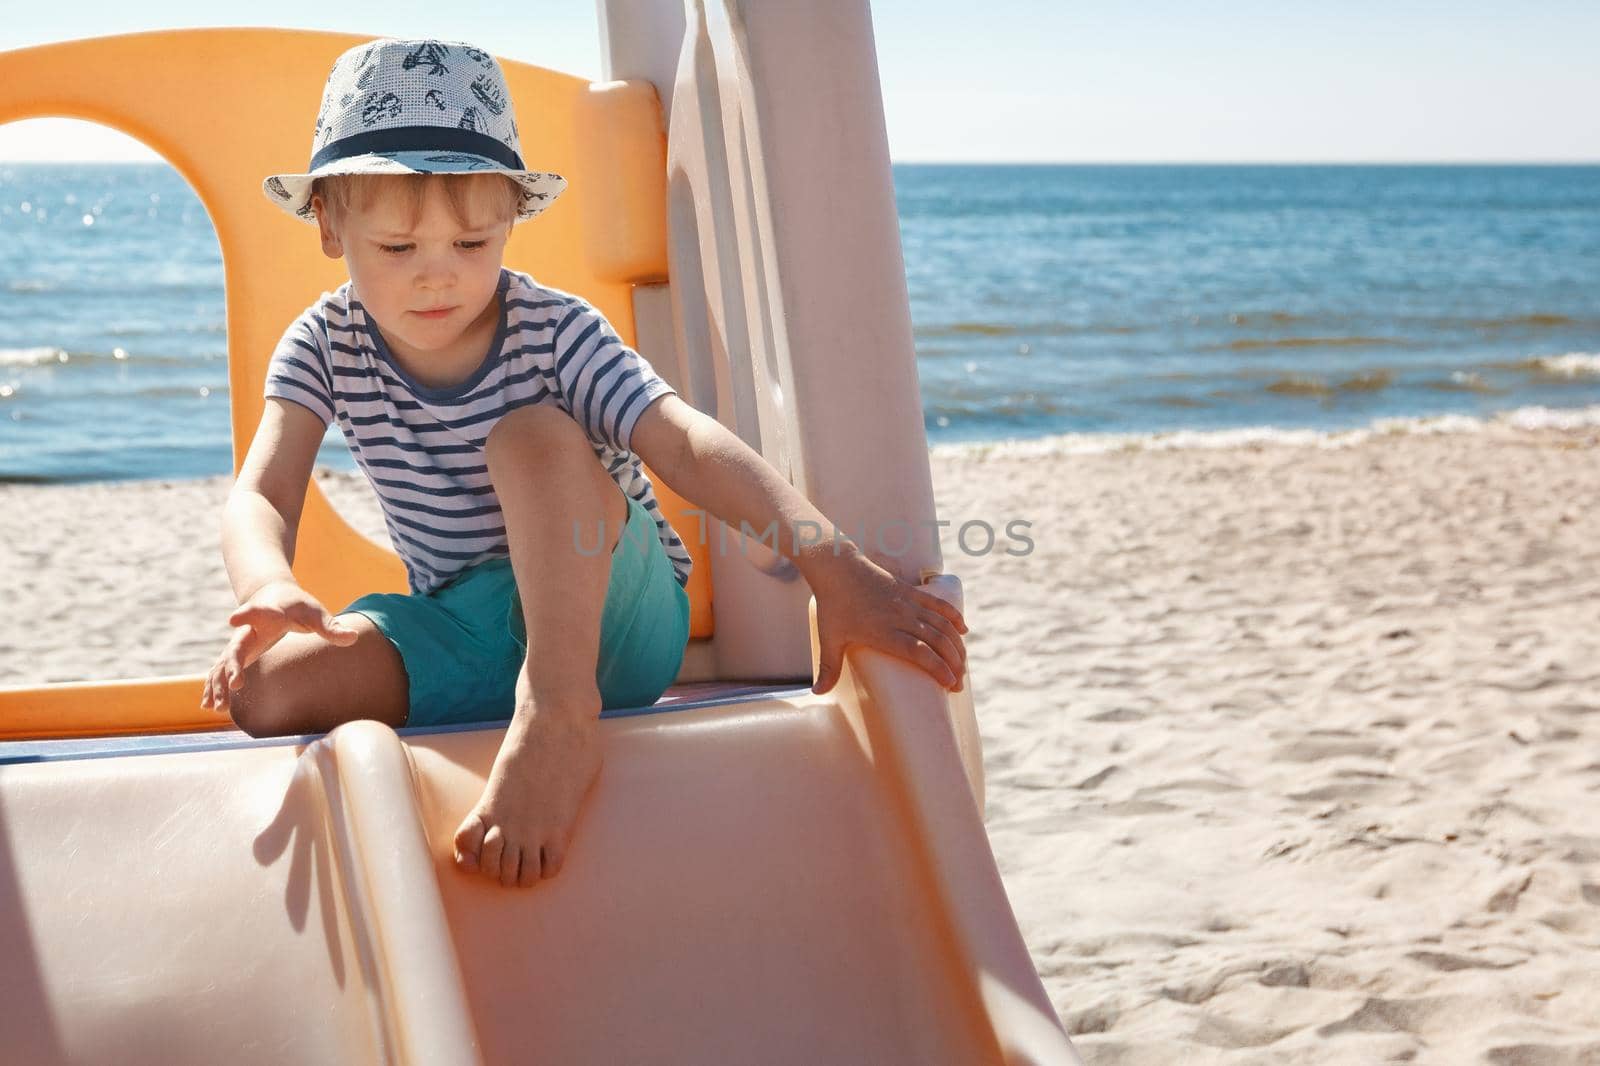 The boy is getting ready to slide down from the beach slide, sea background